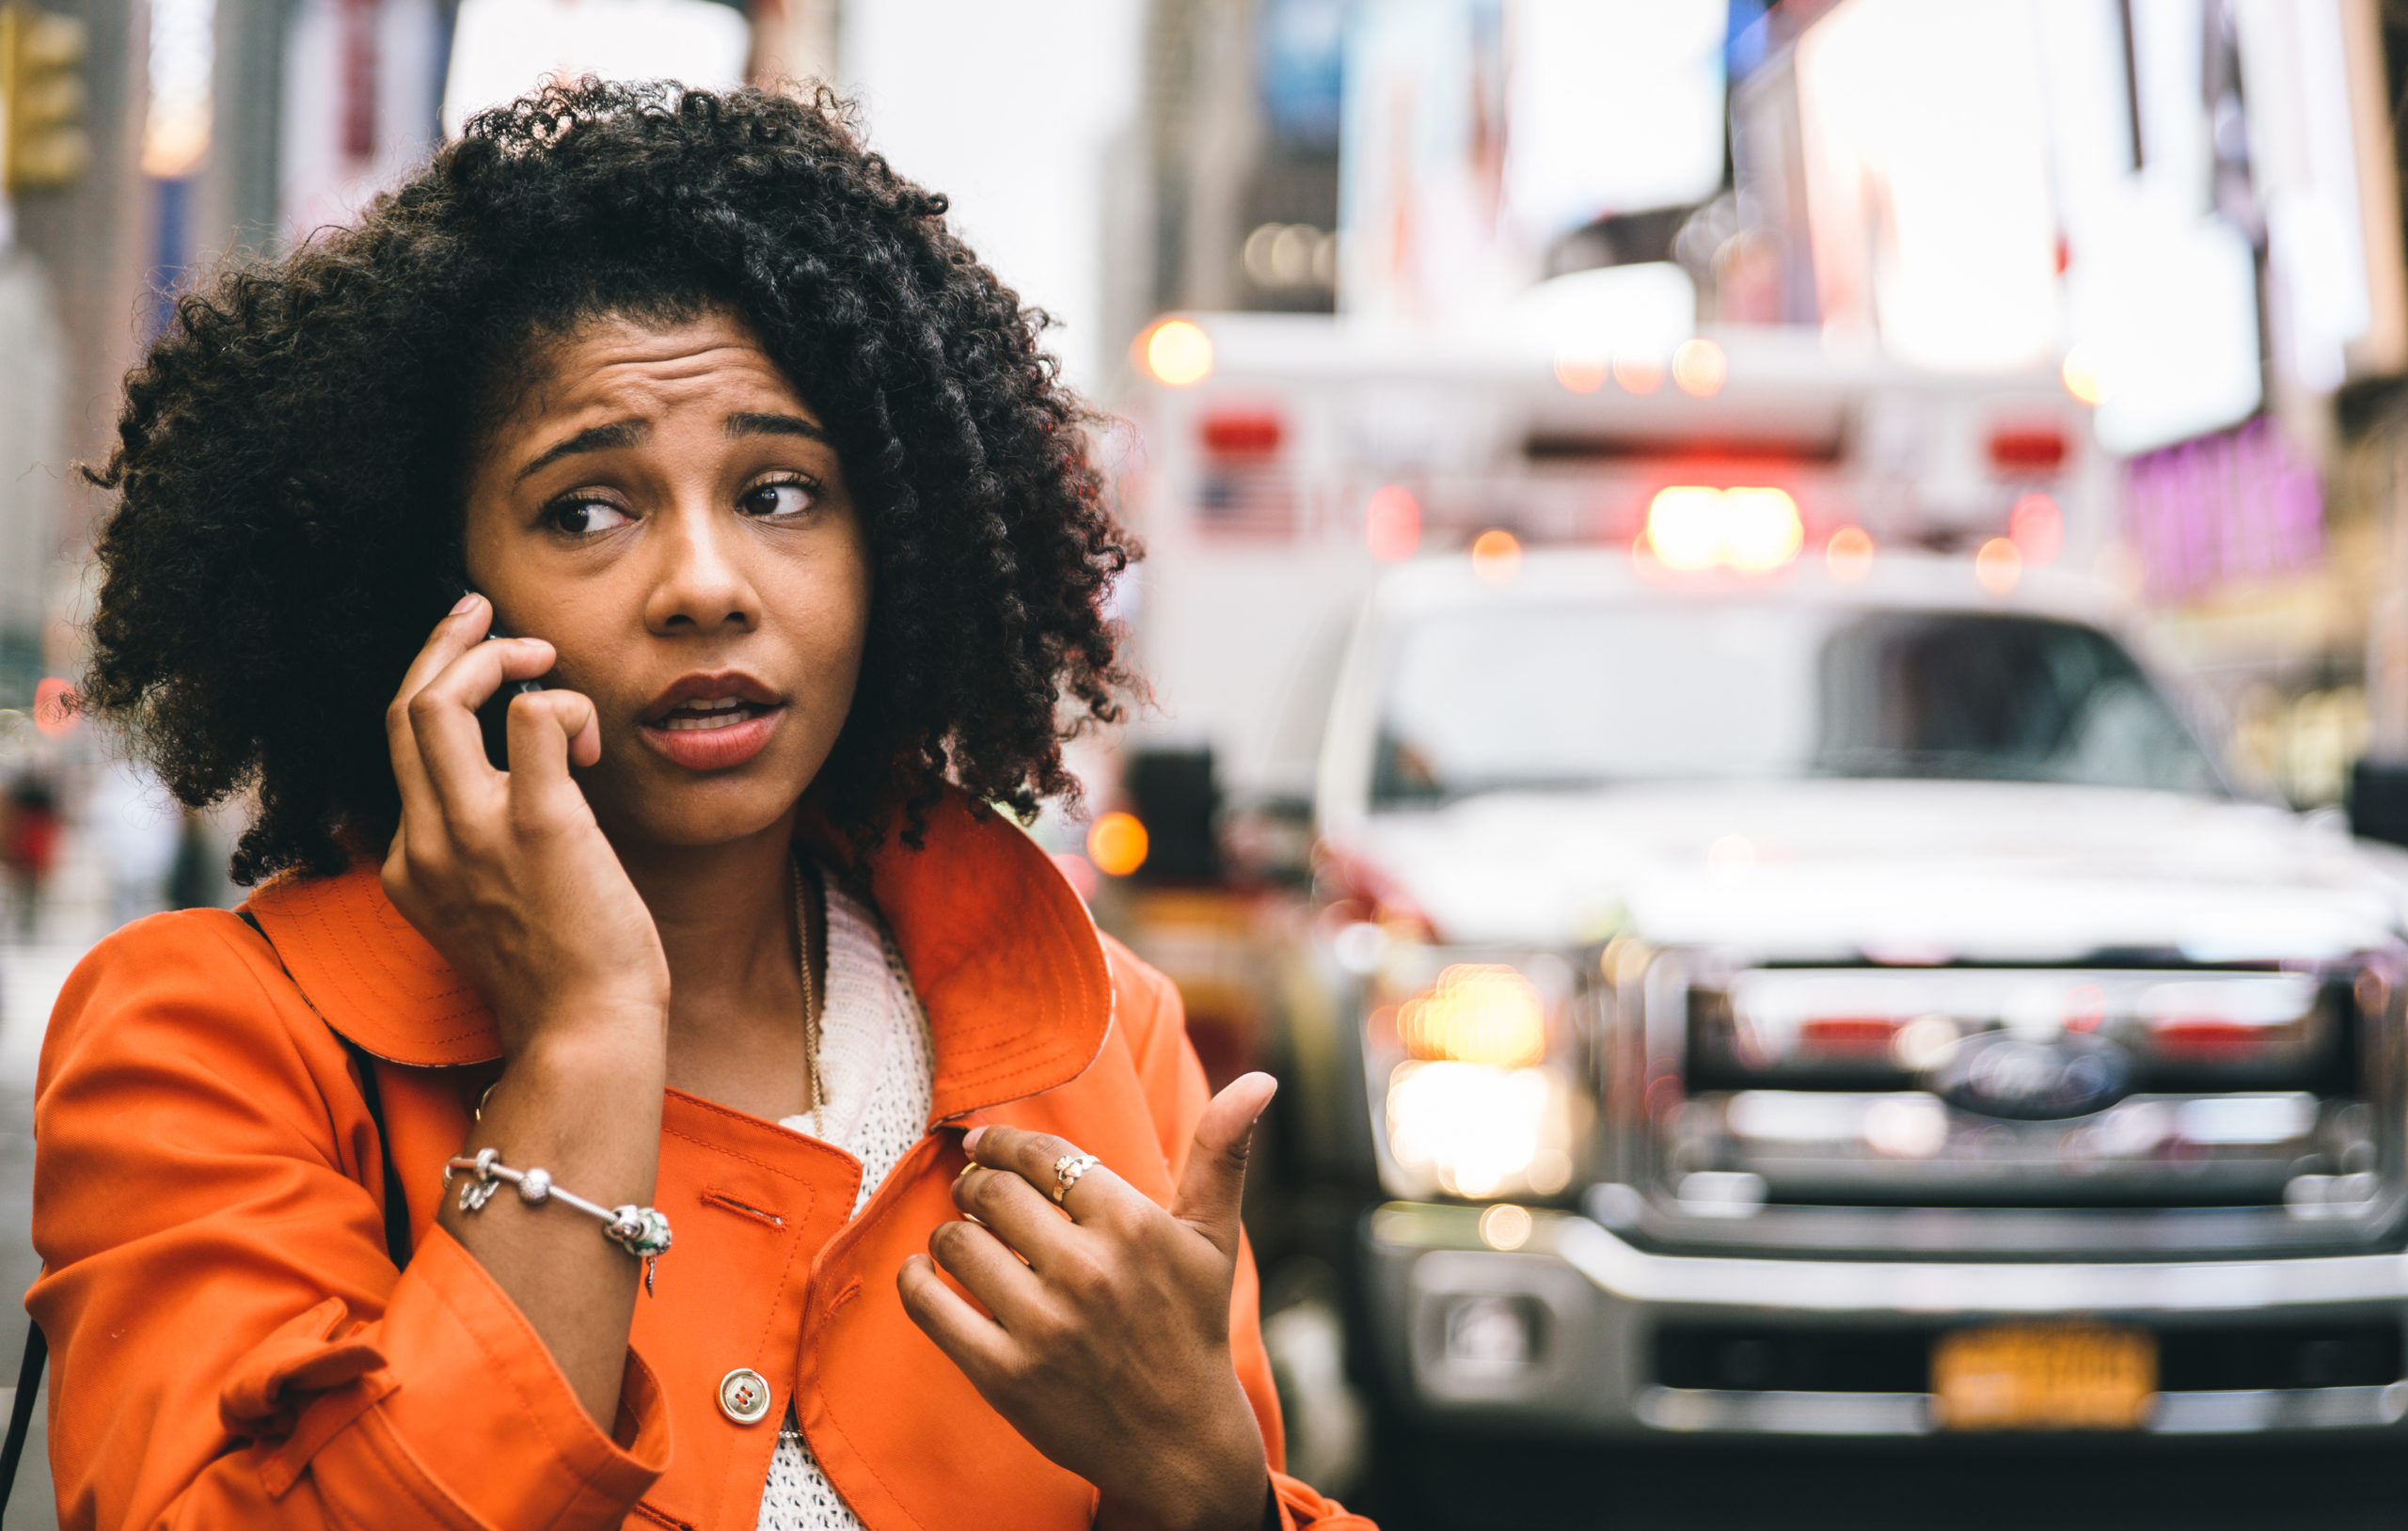 woman calling 911 in New york city. concept about car accidents and emergency